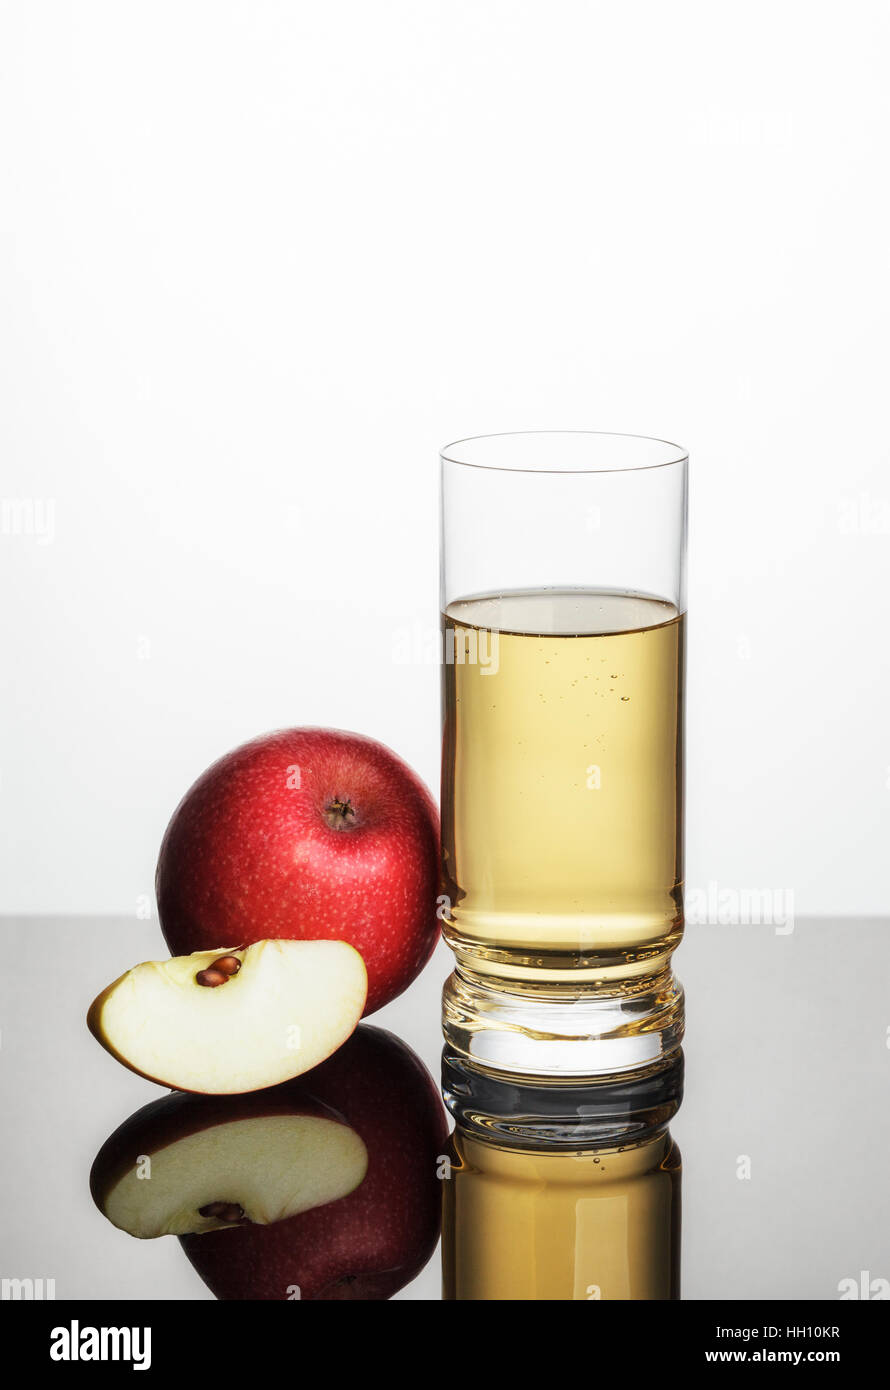 Apple Juice and a red Apple Stock Photo